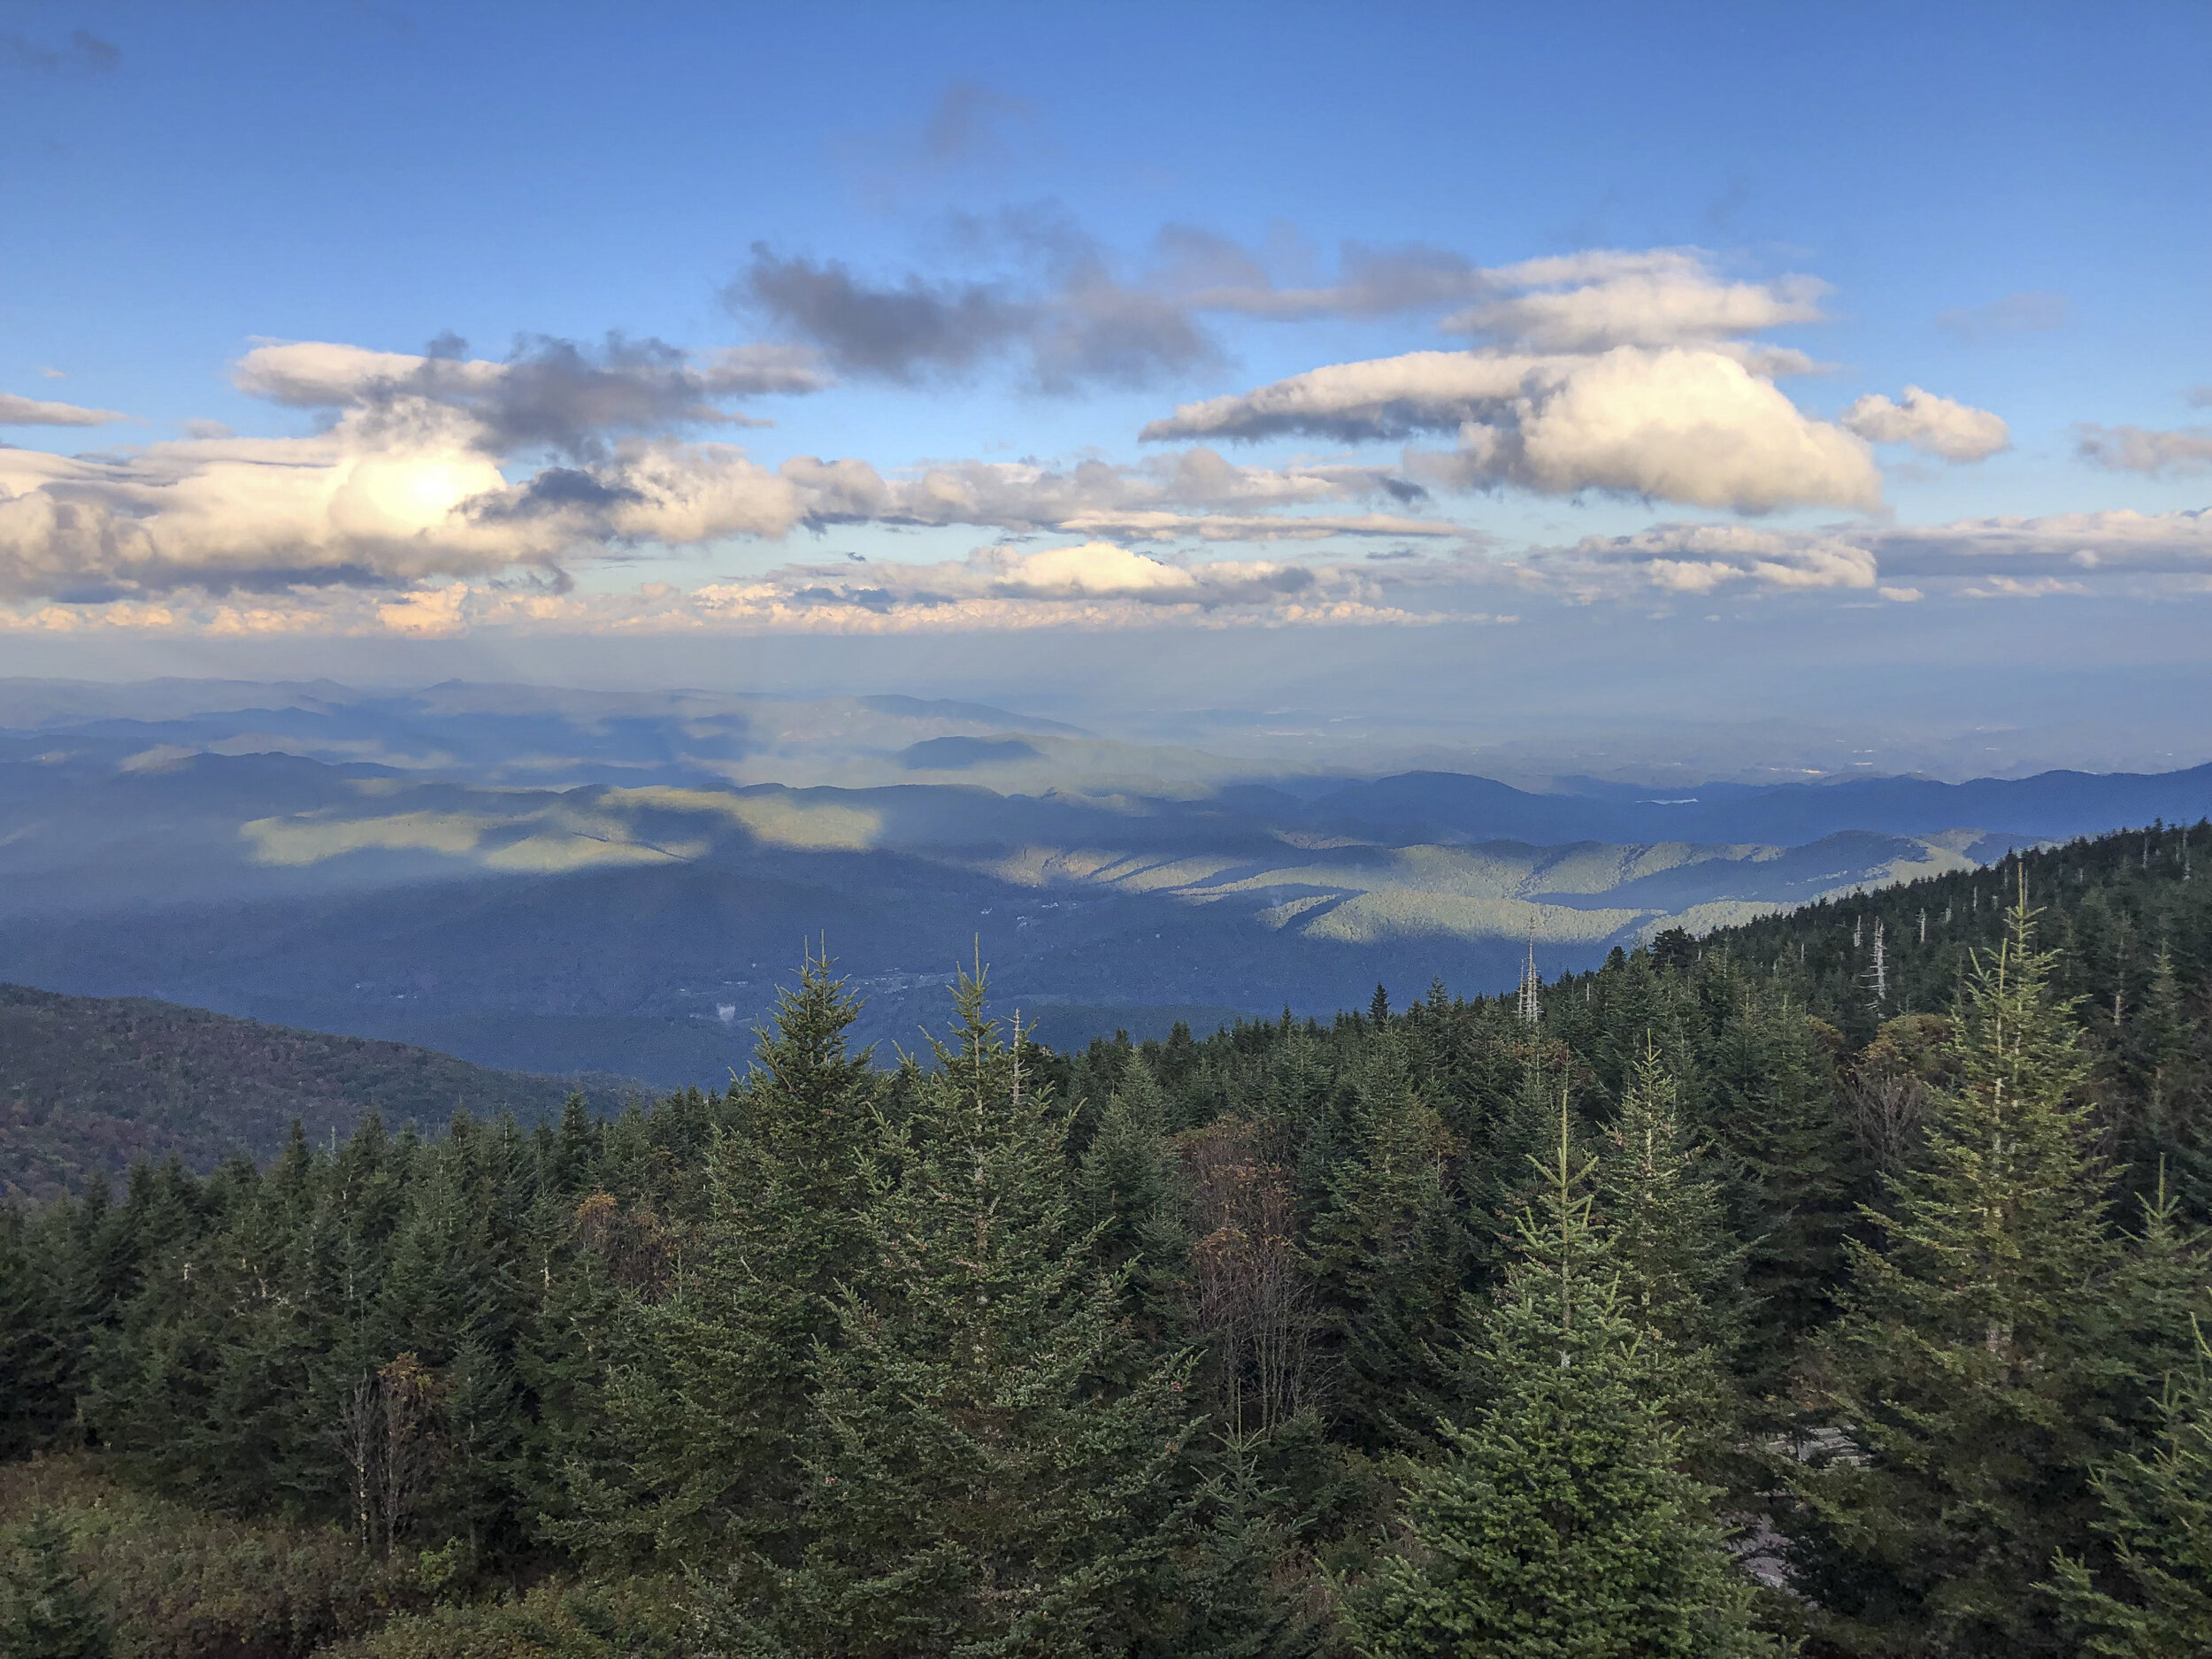  Frasier fir as far as I can see from the top of Mount Mitchell in North Carolina, the highest point East of the Mississippi 